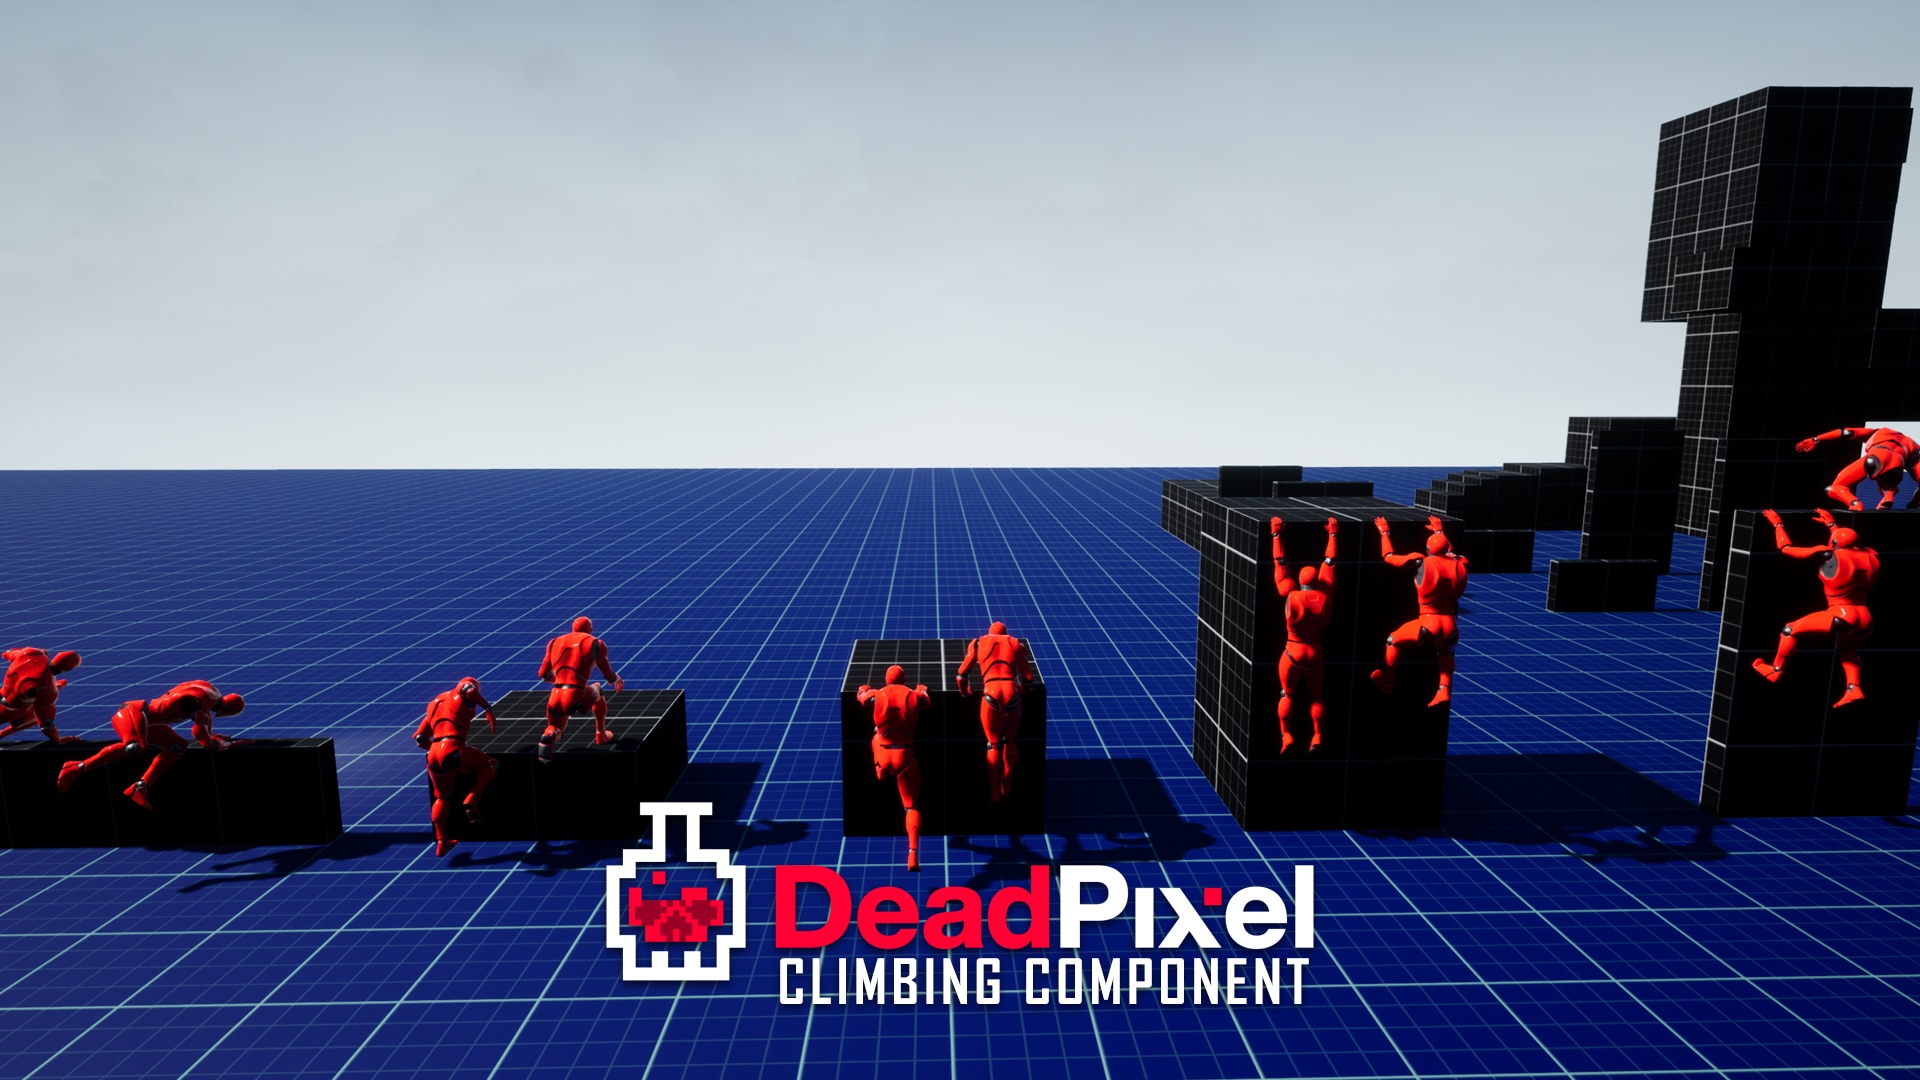 Climb and Vaulting Component